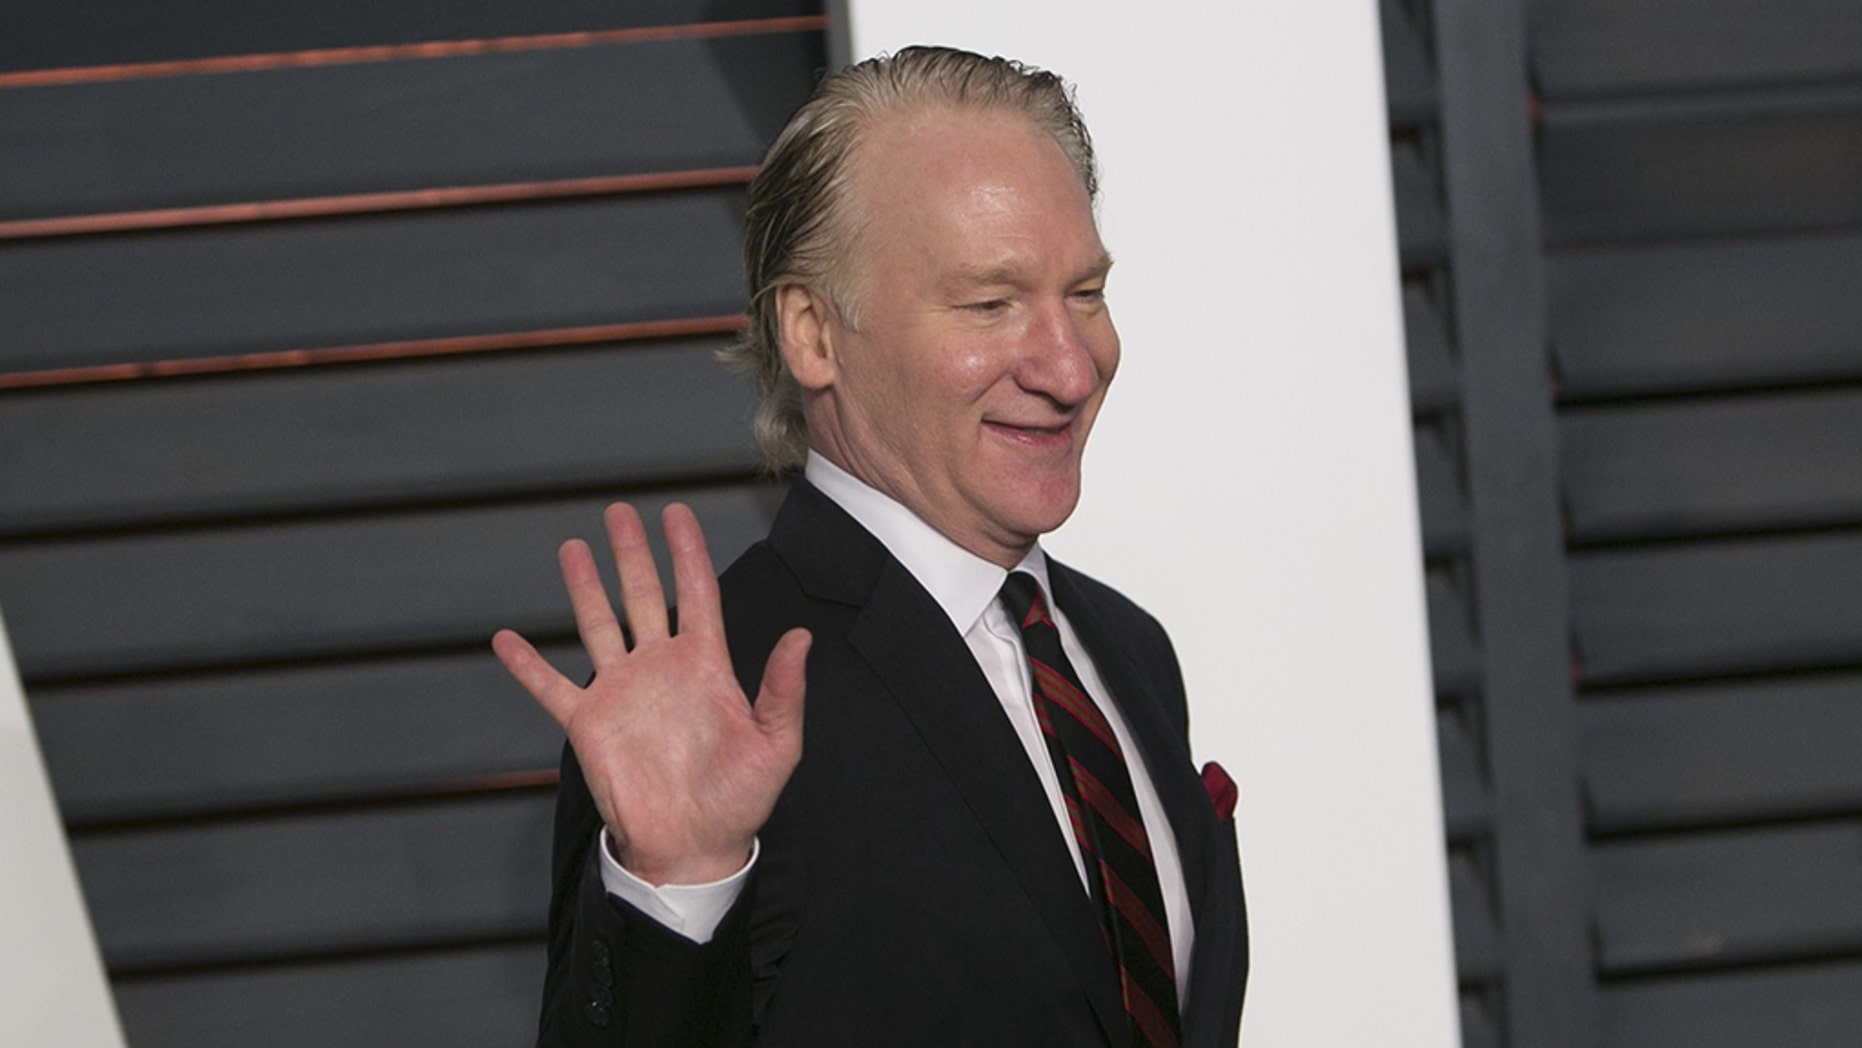 Bill Maher arrives at the 2015 Vanity Fair Oscars in Beverly Hills, California. (ADRIAN SANCHEZ-GONZALEZ / AFP / Getty Images)